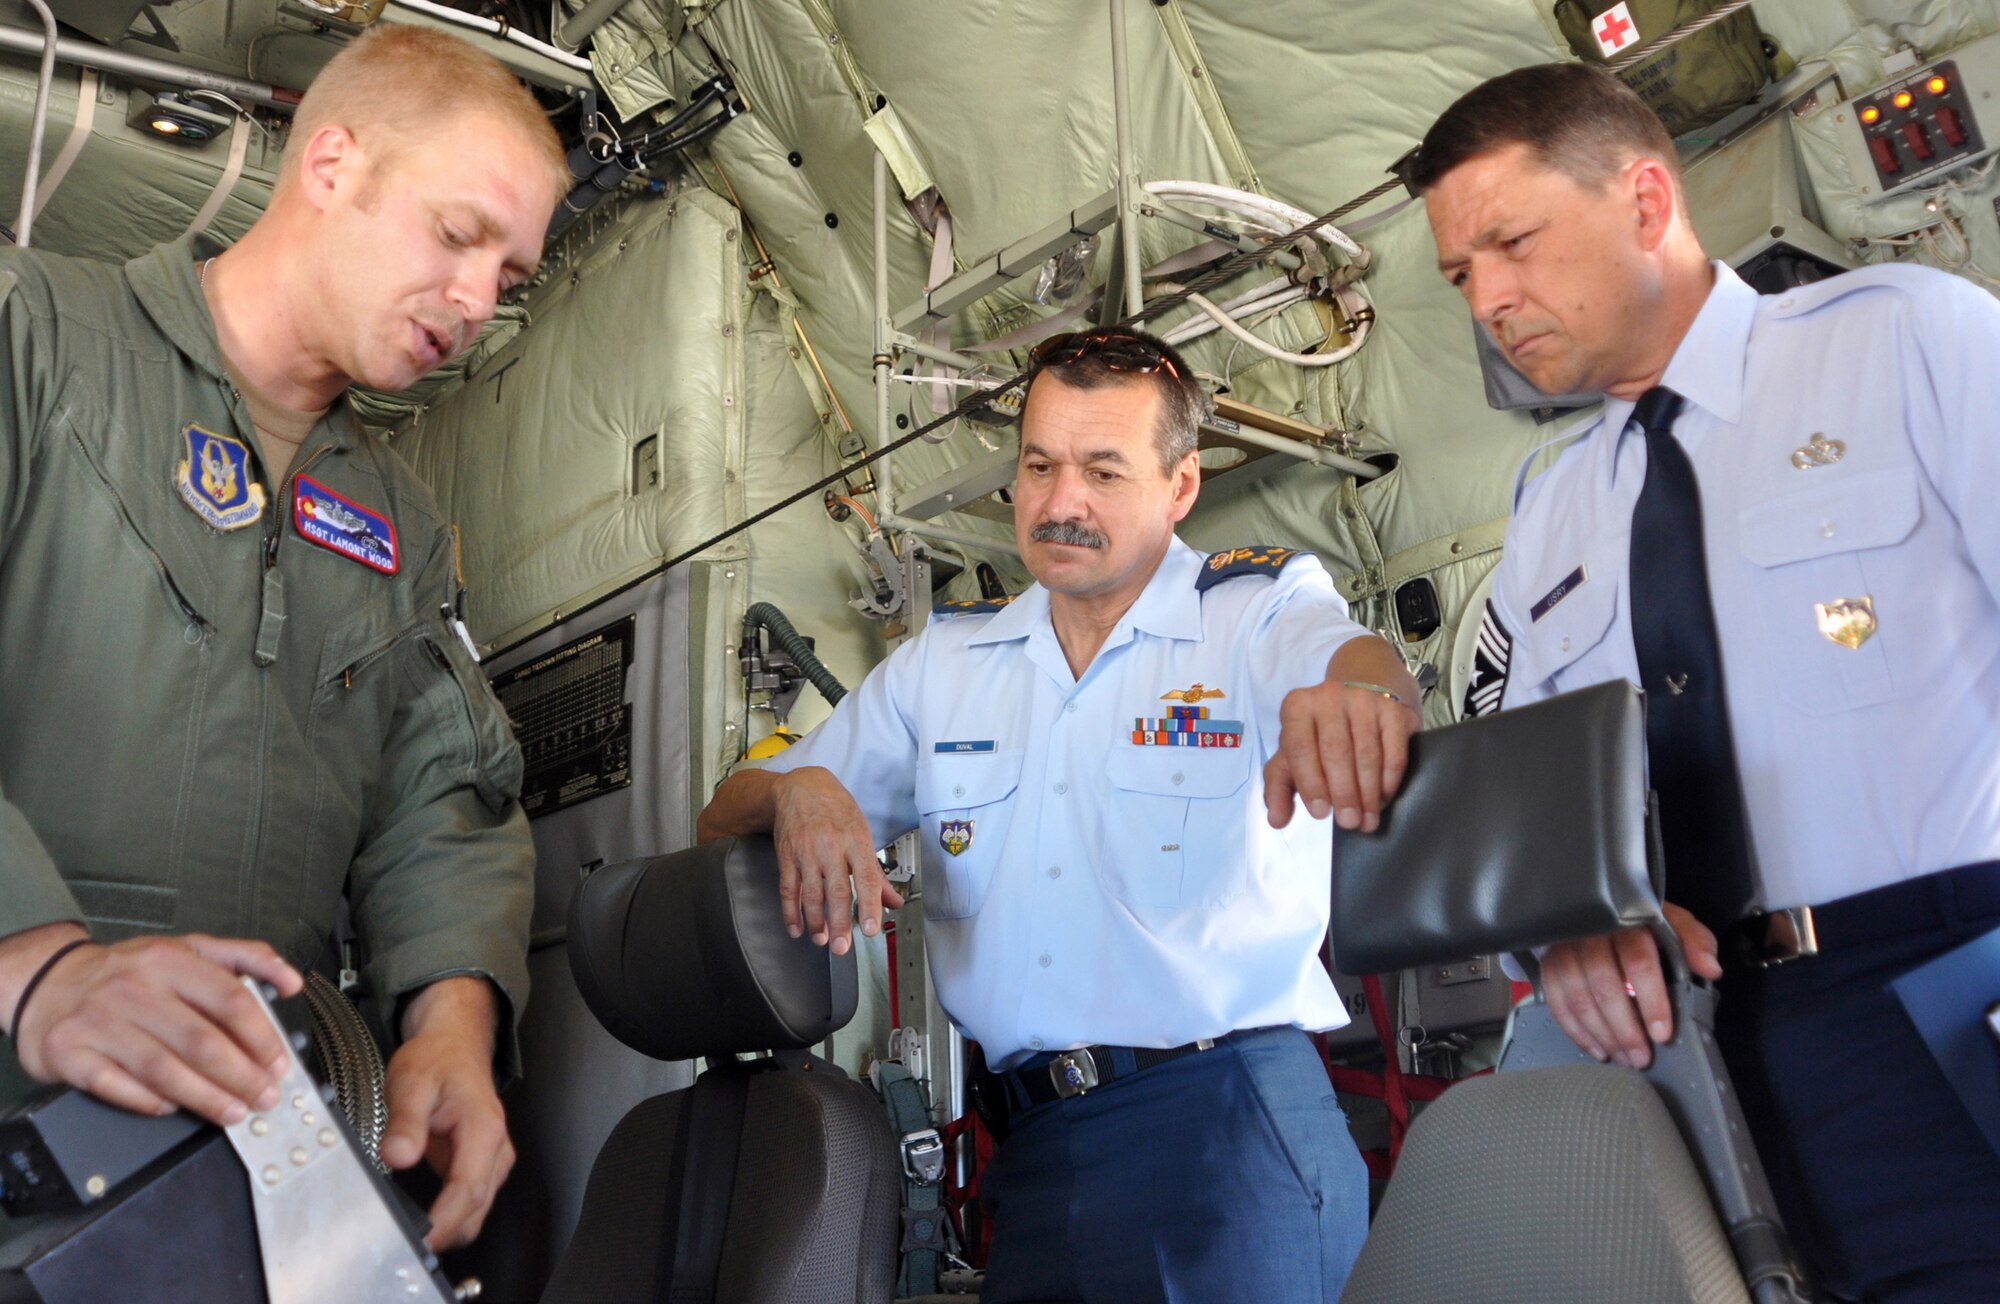 Master Sgt. Lamont Wood (left) explains the layout of a Modular Airborne Firefighting System II control panel to Canadian Lt. Gen. J.M. Duval (center) and Chief Master Sgt. W. Allen Usry during a 302nd Airlift Wing-sponsored presentation on Air Force Reserve missions to senior North American Aerospace Defense Command and U.S. Northern Command officials July 26 at Peterson Air Force Base, Colo. The visit, headlined by Navy Adm. James A. Winnefeld, Jr., NORAD and USNORTHCOM commander, helped to give the senior leaders a better understanding of the specialized missions the AF Reserve supports, as well as the capabilities it can provide to civilian-related missions if called upon. General Duval is the NORAD deputy commander, and Chief Usry is the senior enlisted advisor for NORAD and USNORTHCOM. Sergeant Wood is a C-130 Hercules loadmaster within the 302nd AW. (U.S. Air Force photo/Staff Sgt. Stephen J. Collier)